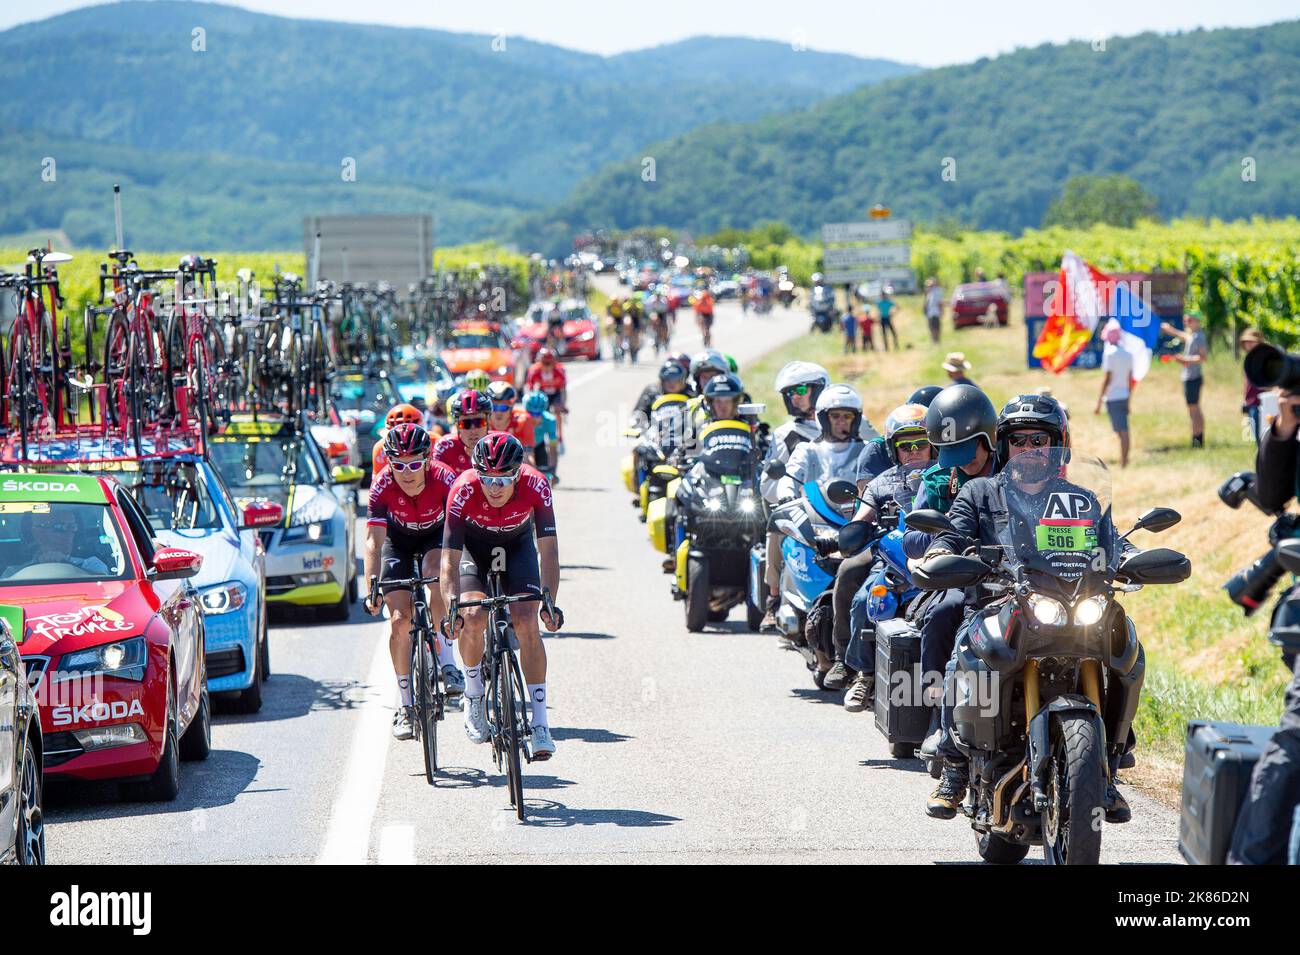 Gianni Moscon along eith Geraint Thomas and Luke Rowe ride towrds the back of the peloton during the Tour de France 2019 Stage 5 - Saint-Die-Des-Vosges to Colmar Stock Photo